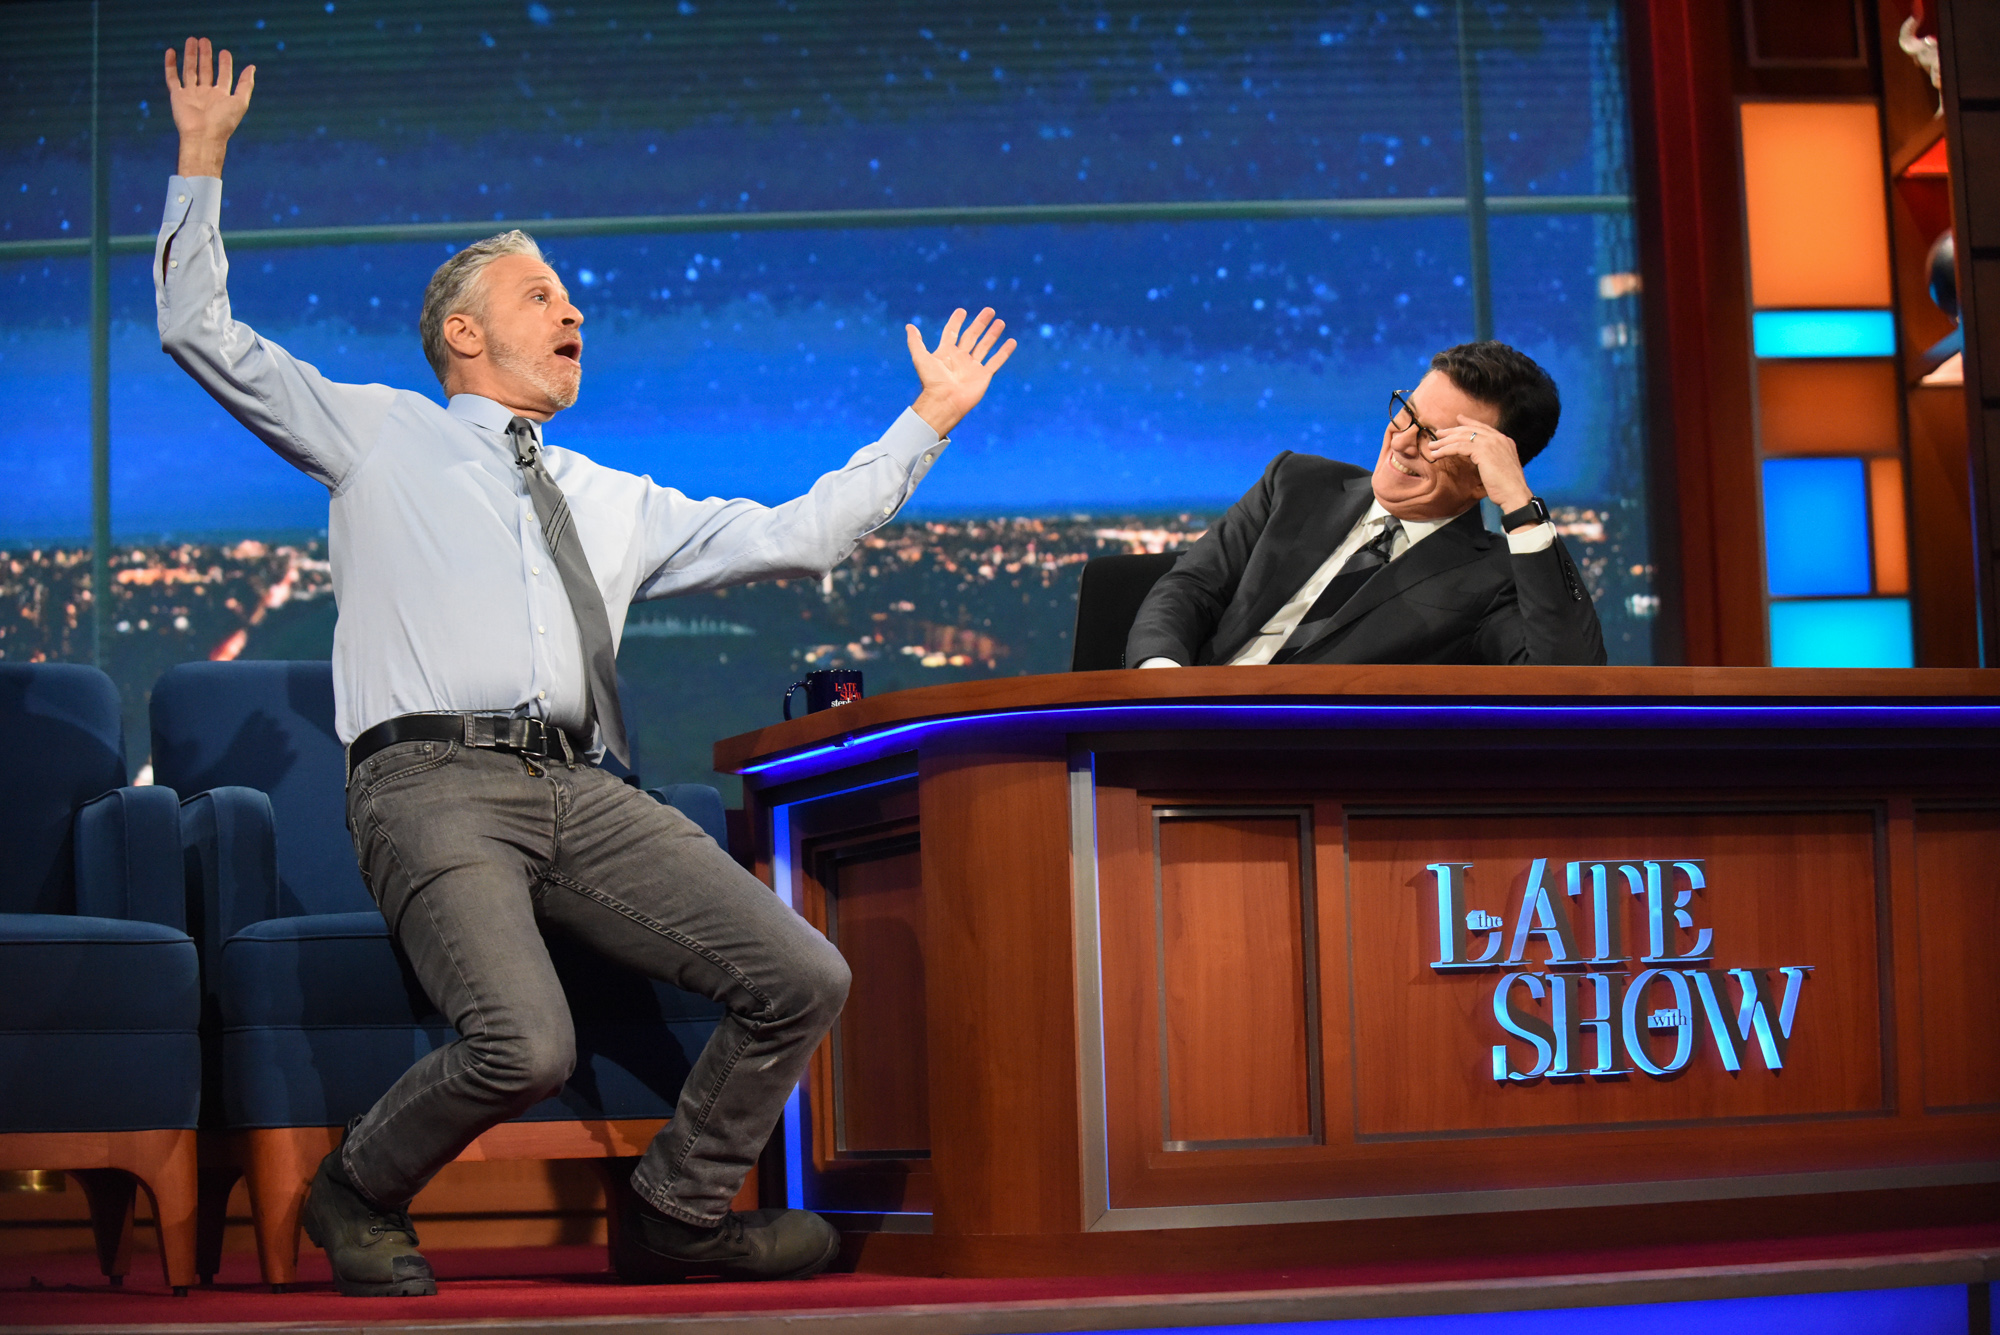 Jon Stewart struggles to get comfortable on the other side of the desk.